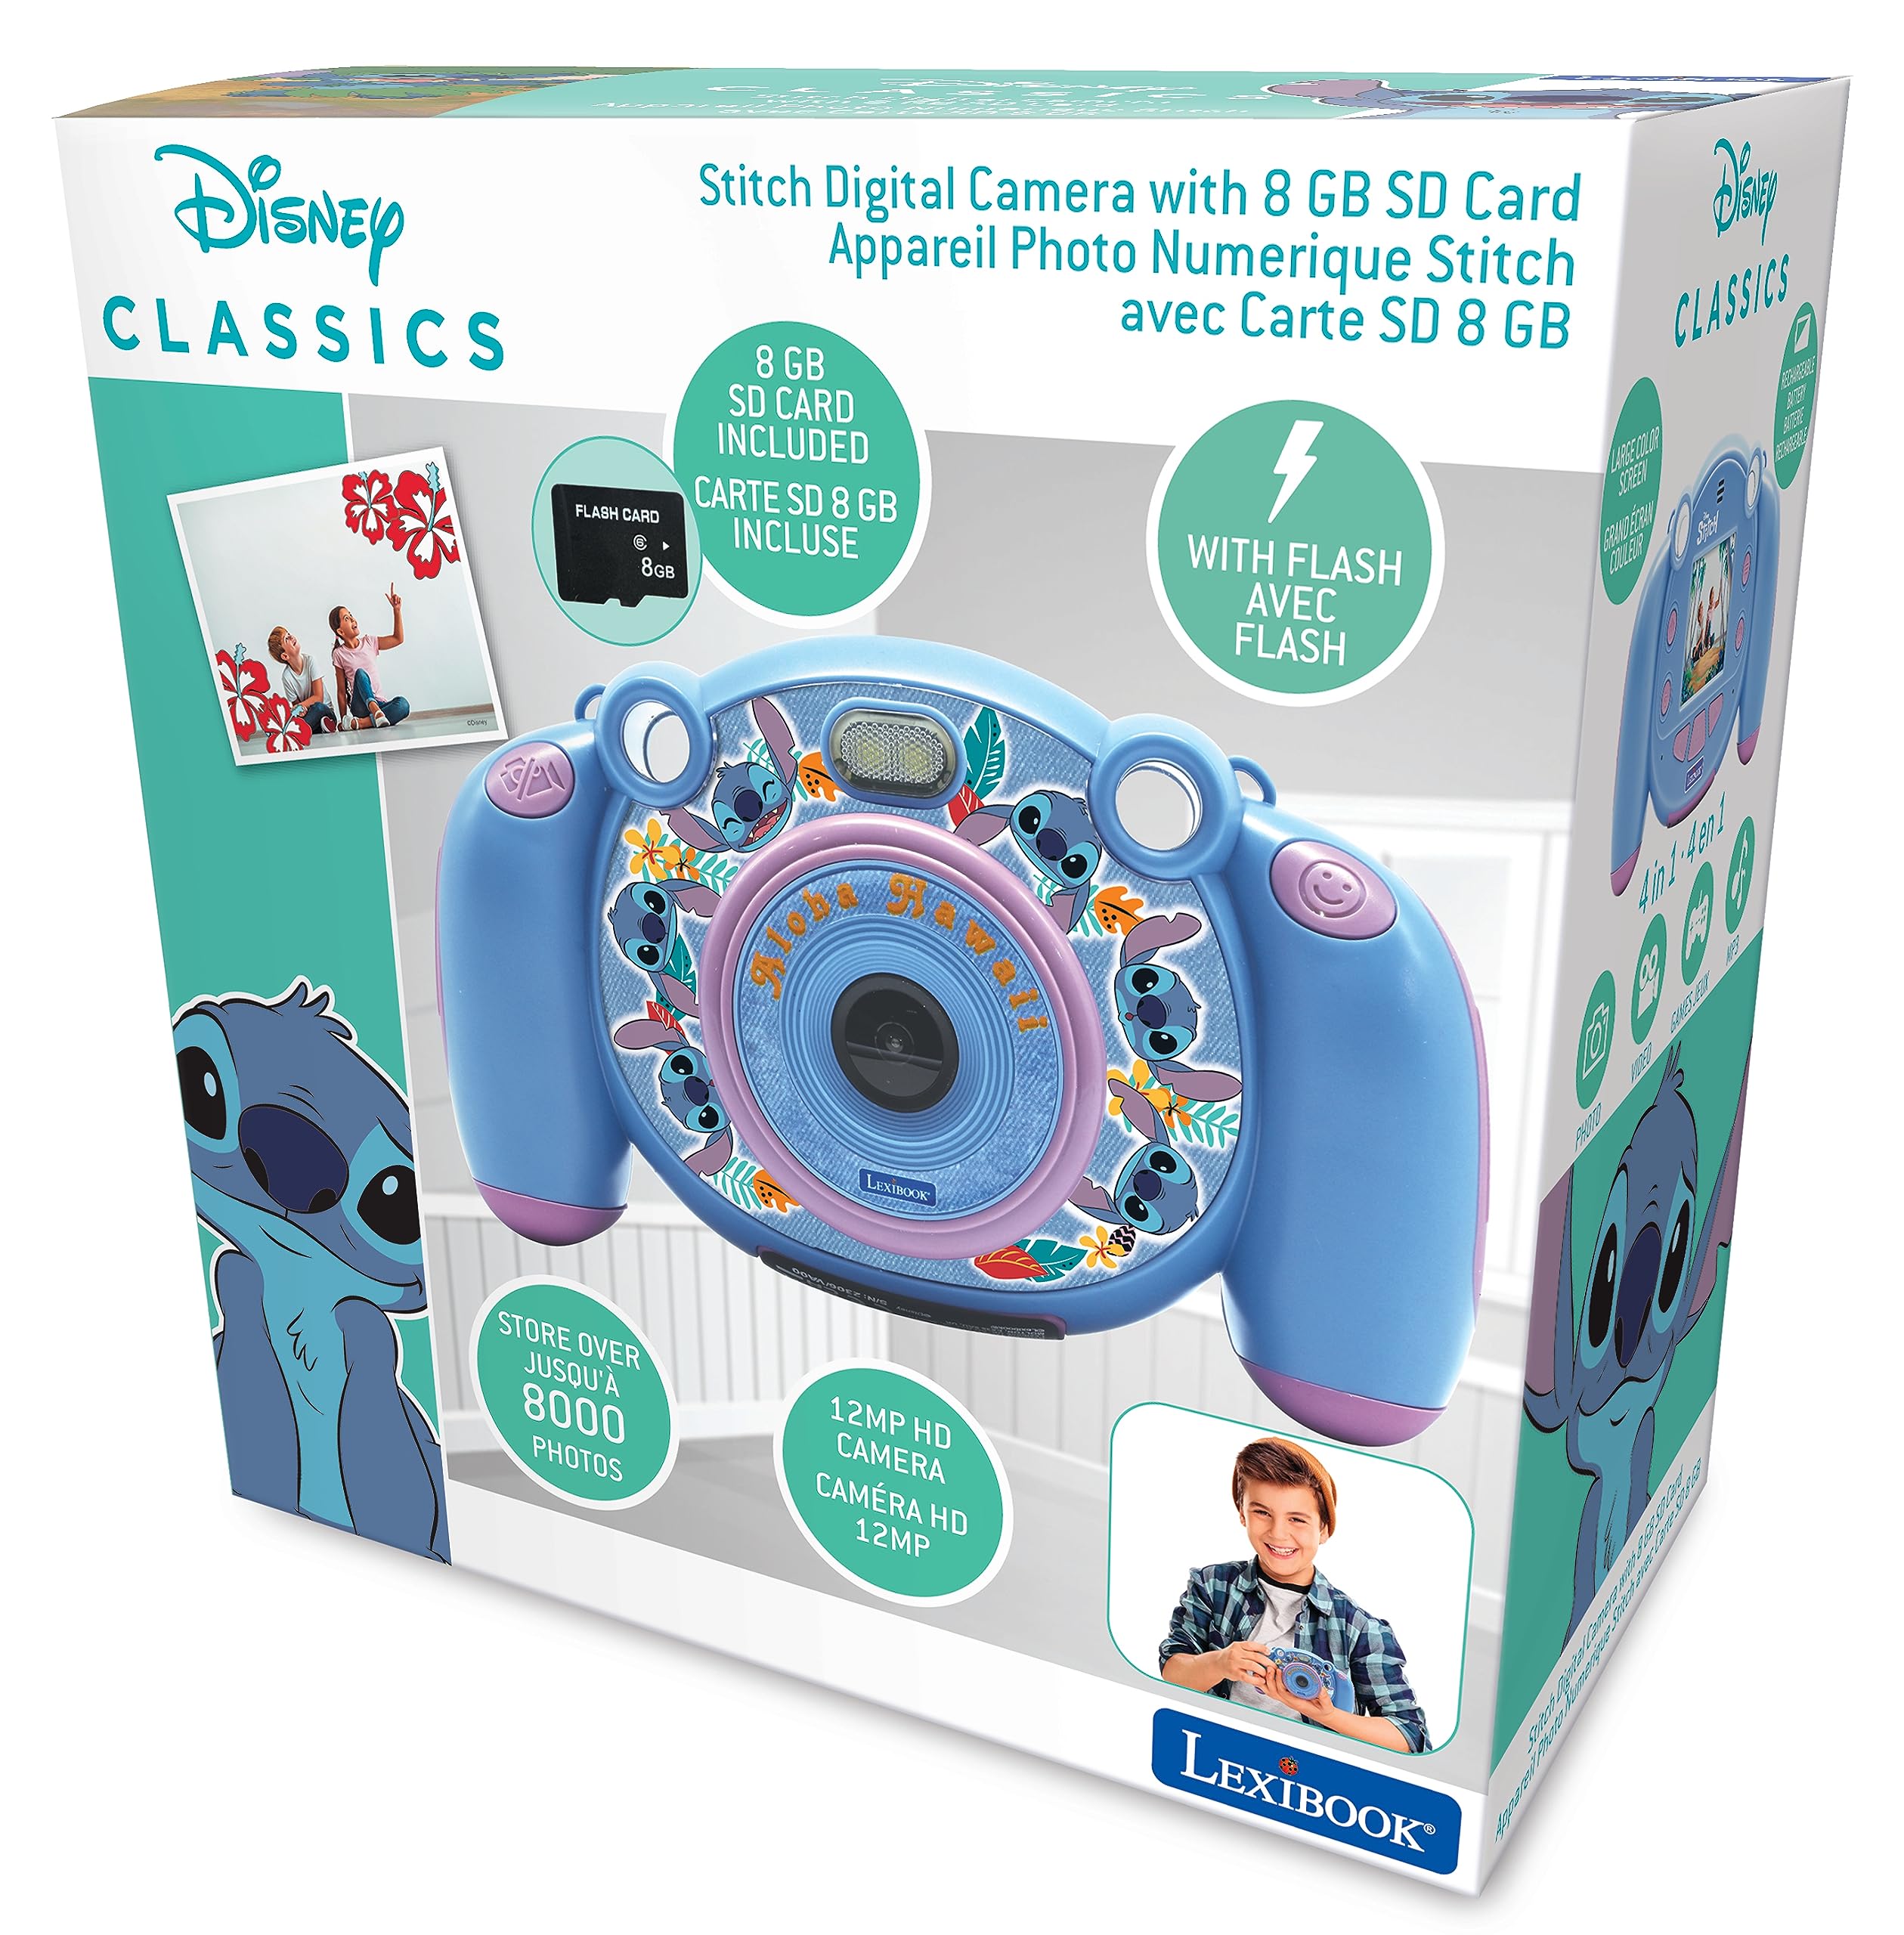 Lexibook - Disney Stitch - 4-in-1 Kids Camera with Photo, Video, Audio and Game Functions - DJ080D